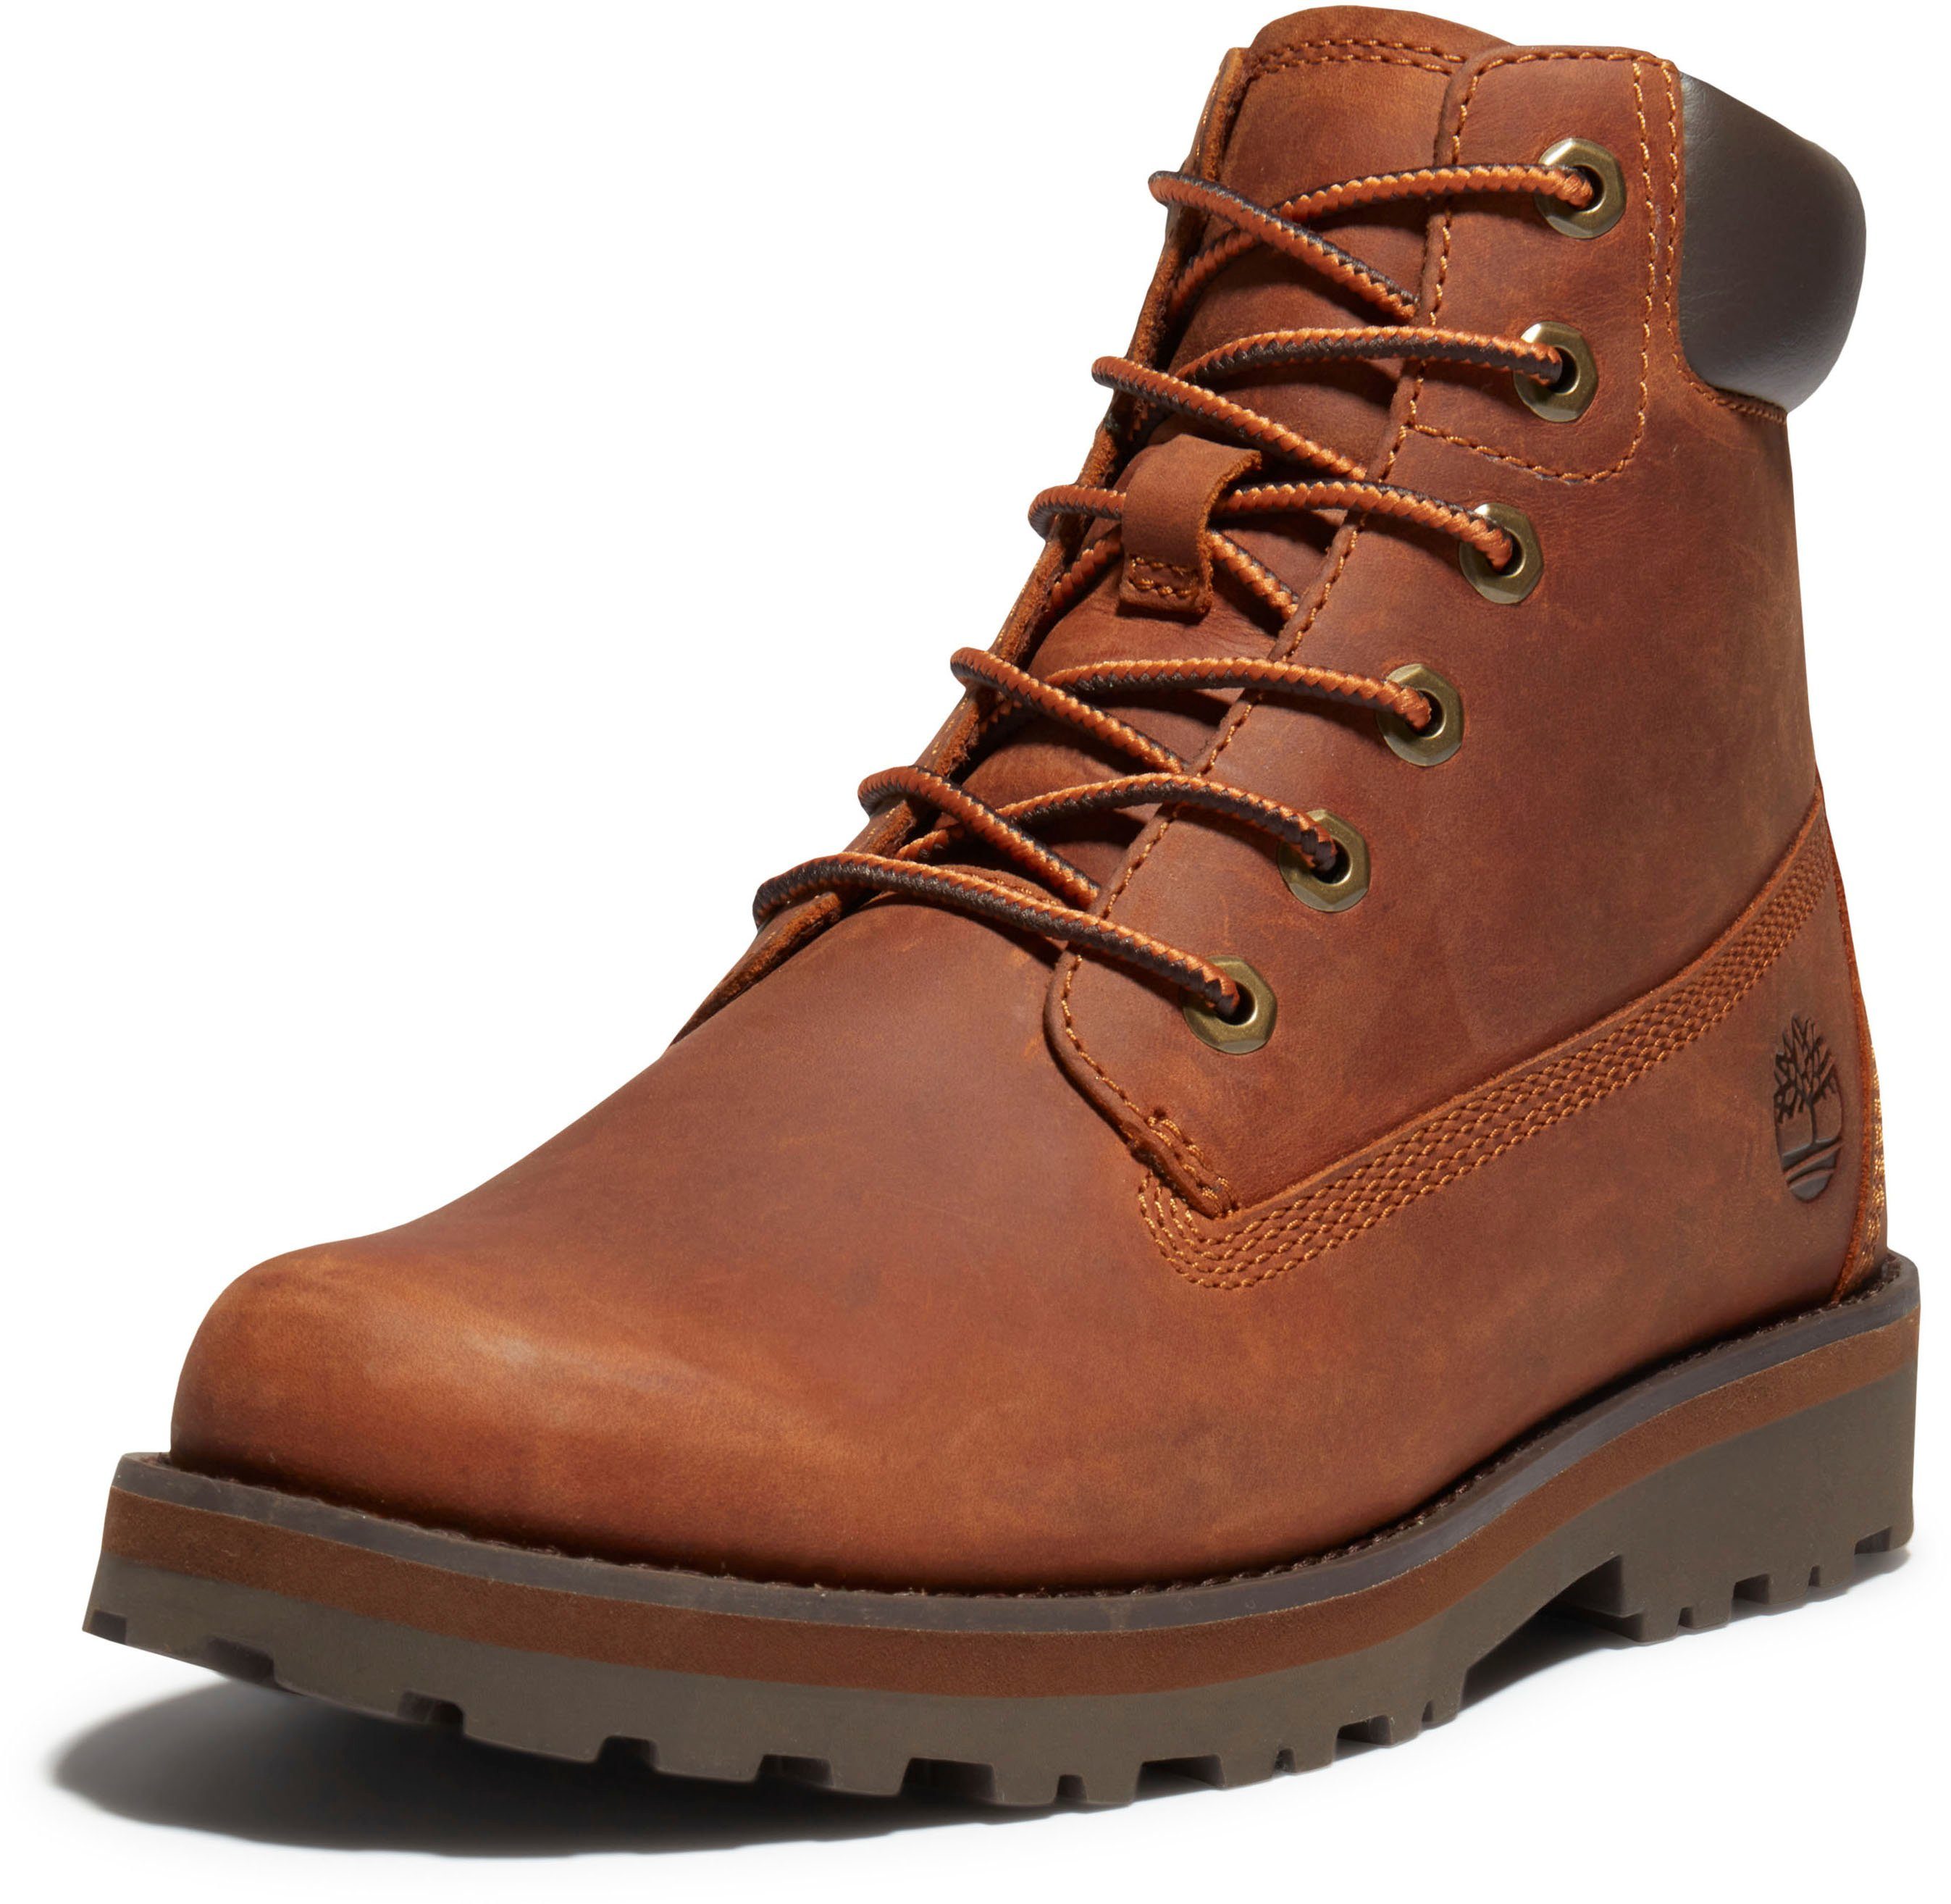 Timberland Courma Kid braun Schnürboots Traditional6In